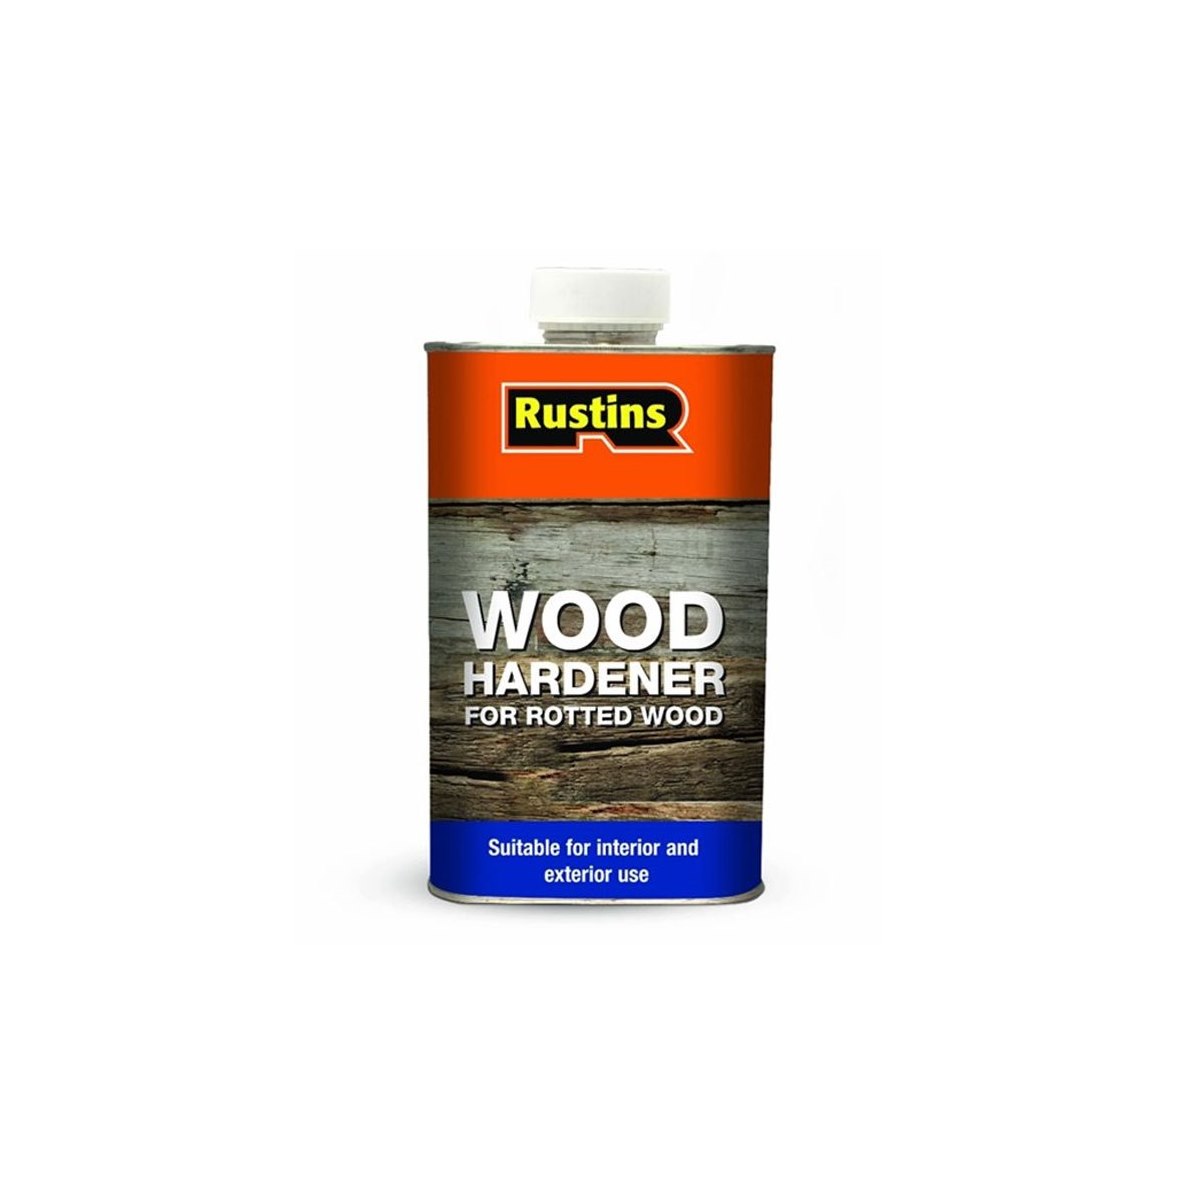 Rustins Wood Hardener for Rotted Wood 250ml